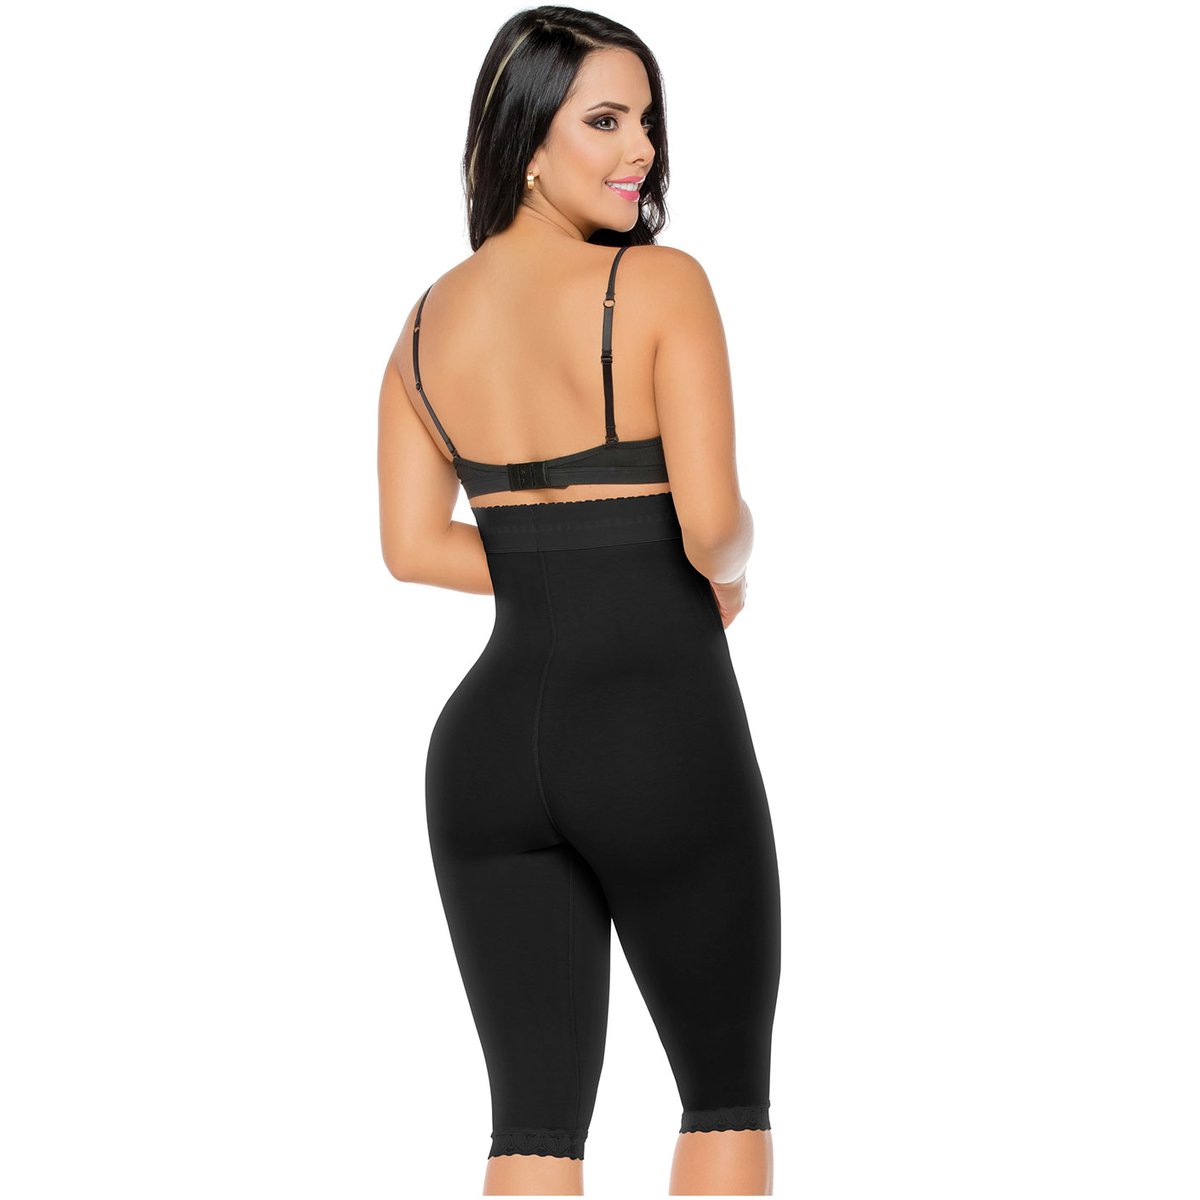 The Best Fajas Colombianas Fresh and Light-Body Girdle for Women Women Shapewear  LEGGINGS Capri style Tammy, Waist, and Thigs Slimmer Fajas reductoras y  moldeadoras Colombianas Black at  Women's Clothing store